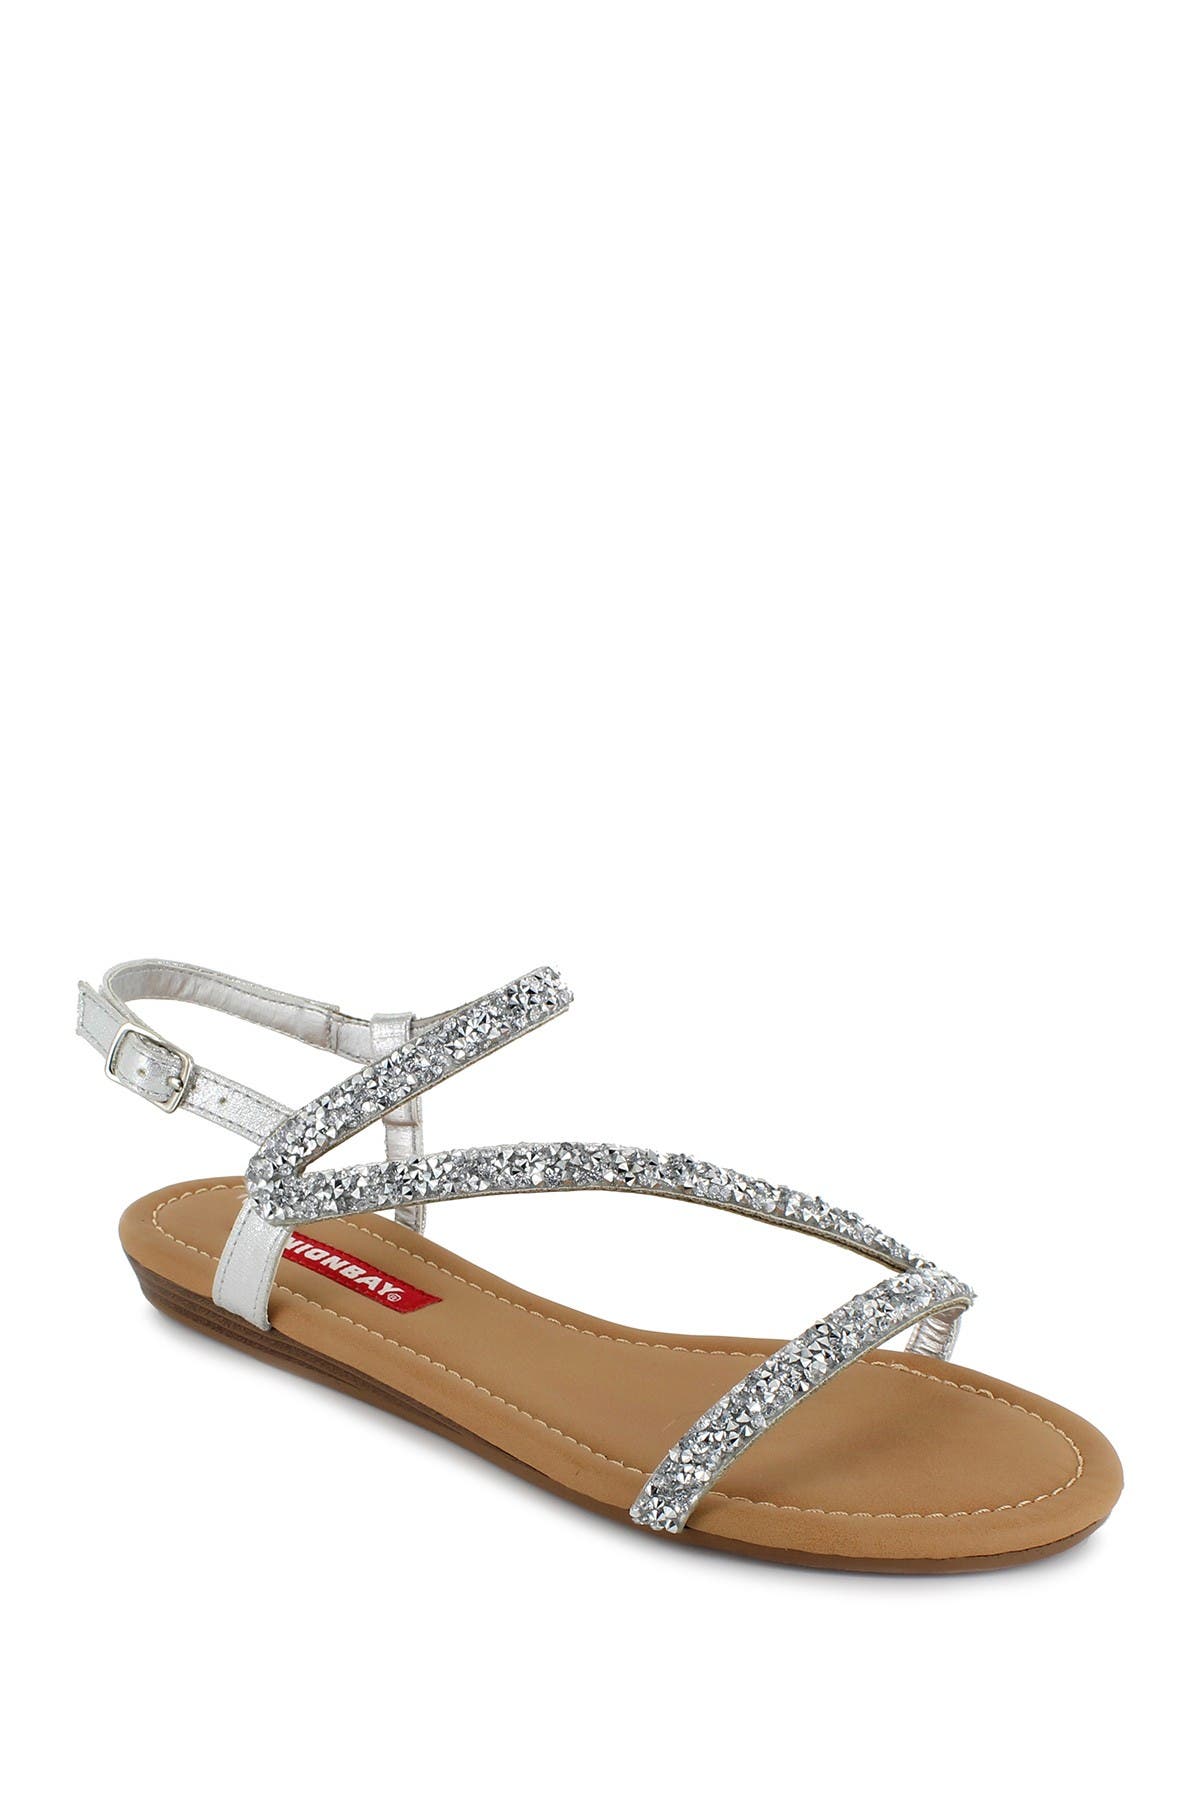 Unionbay Dominick Crystal Embellished Sandal In Silver